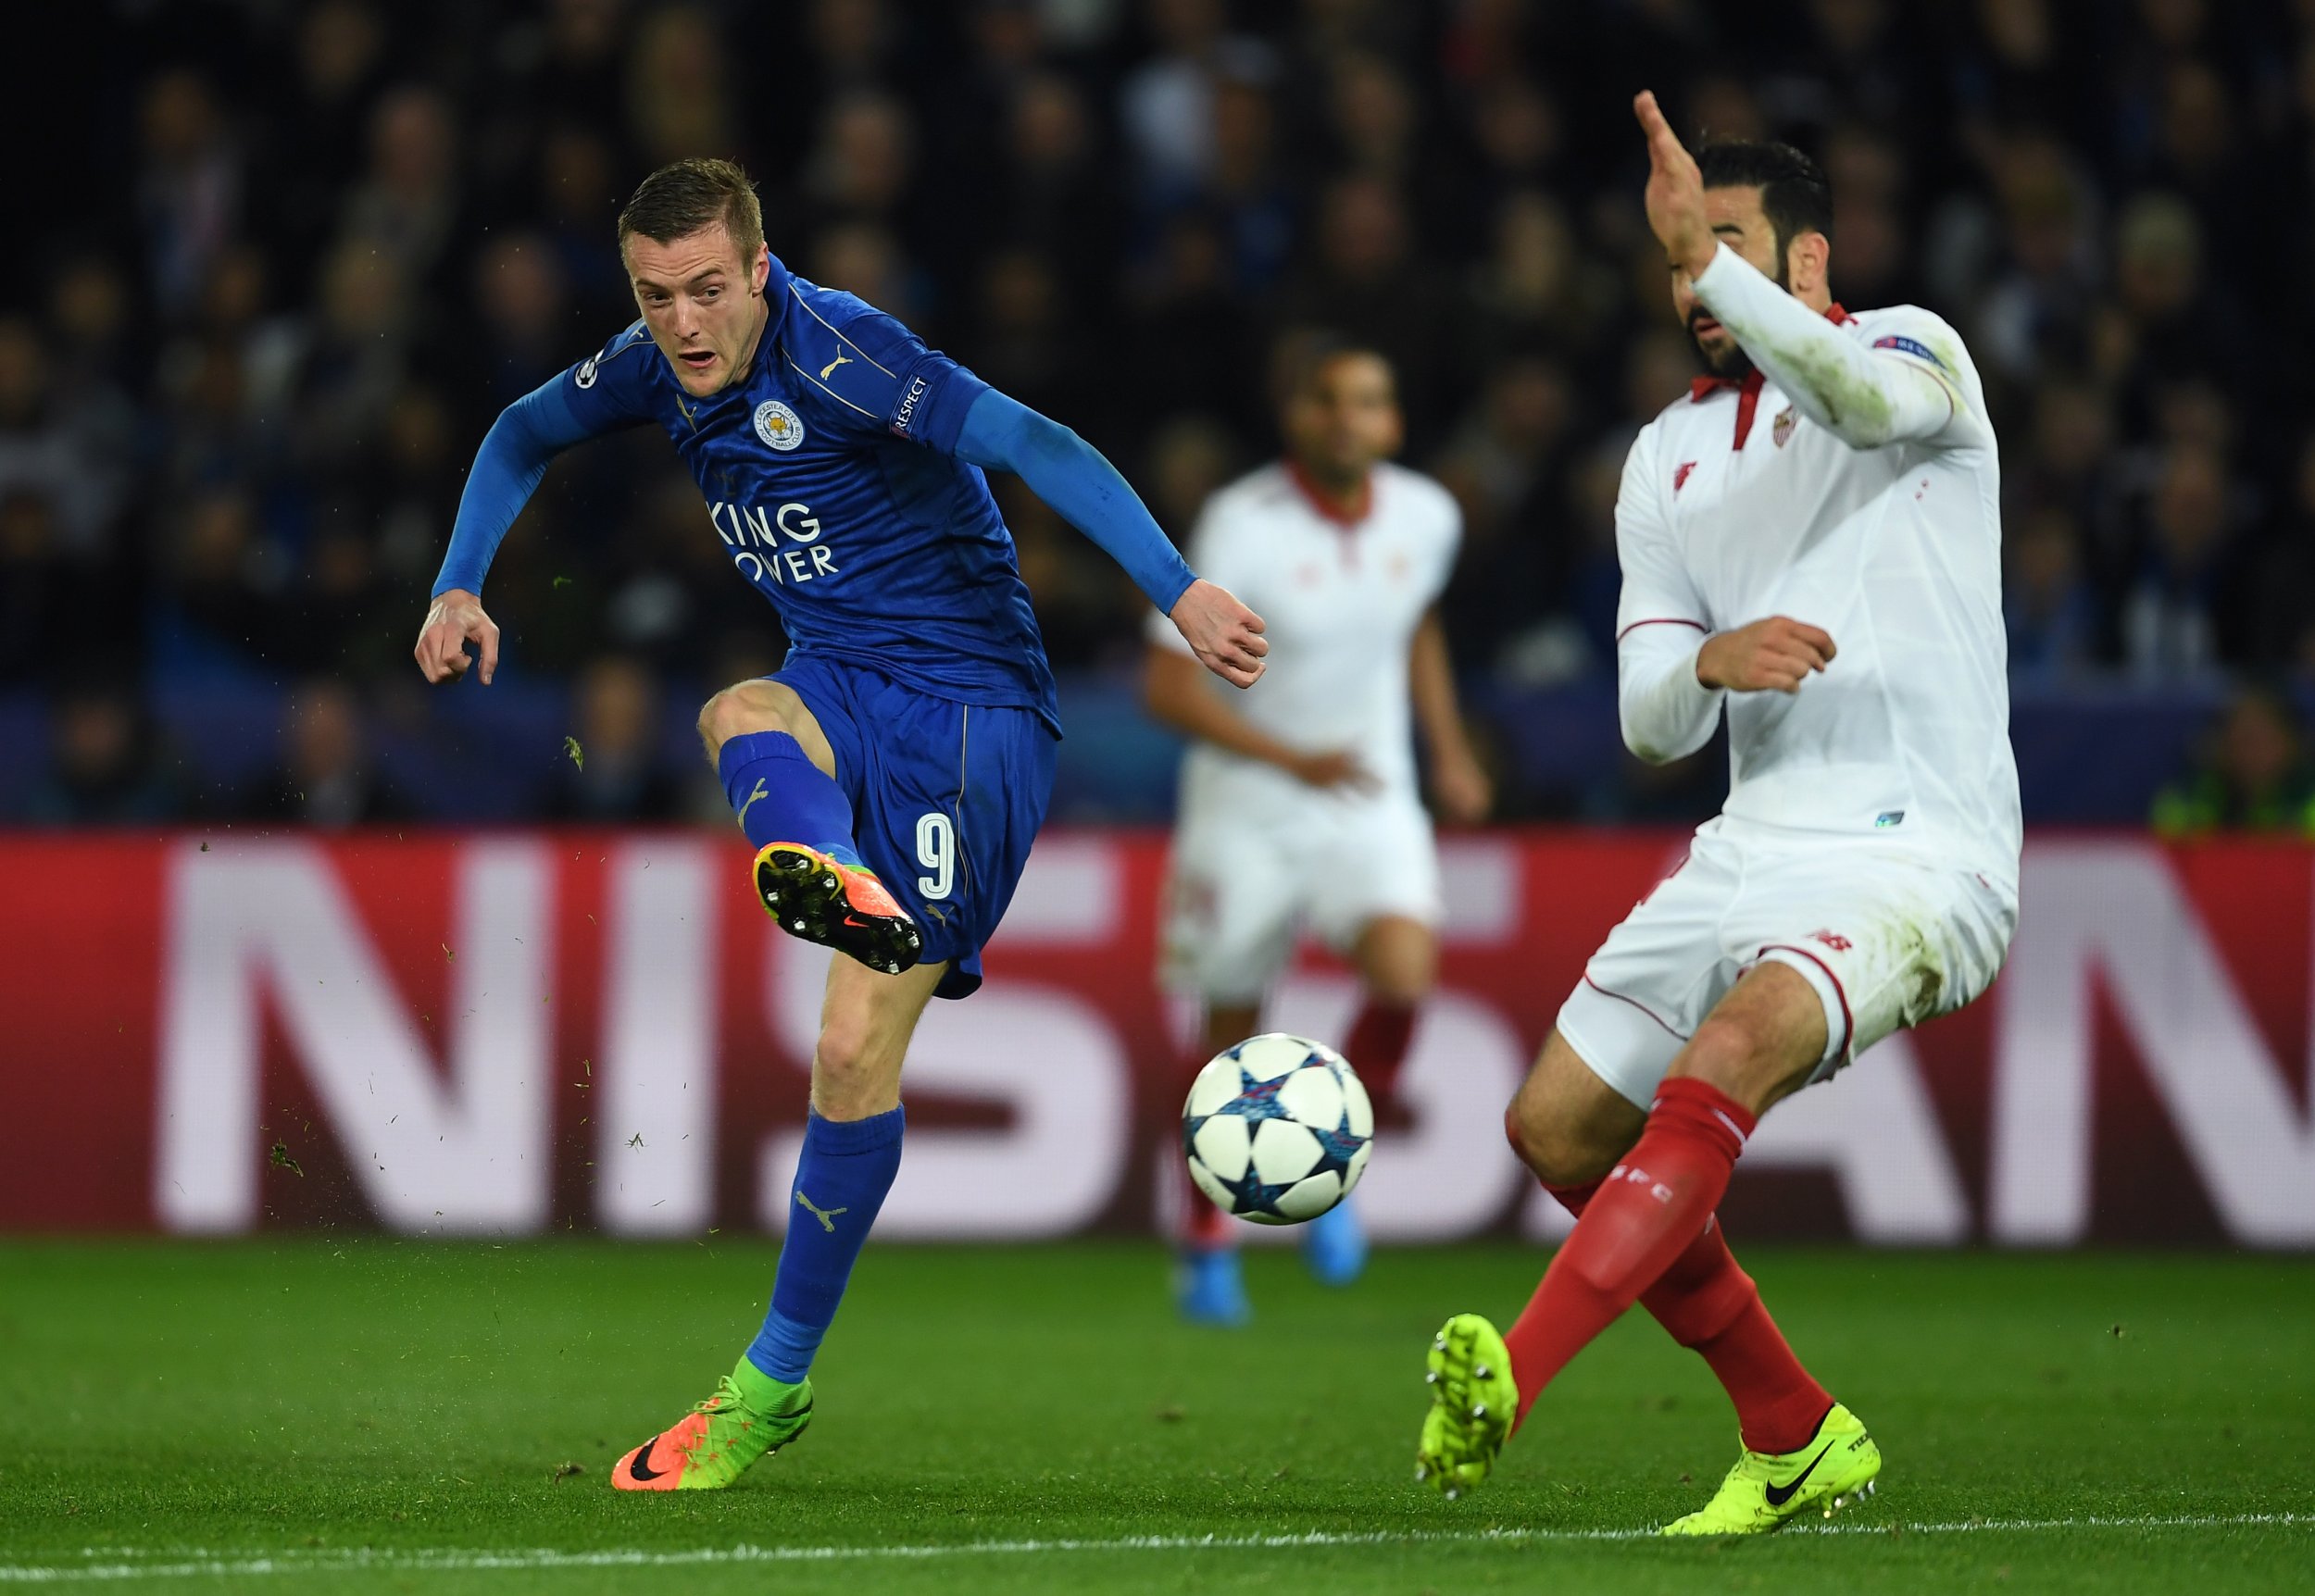 Leicester City Striker Jamie Vardy At The King Power - Leicester City F.c. - HD Wallpaper 